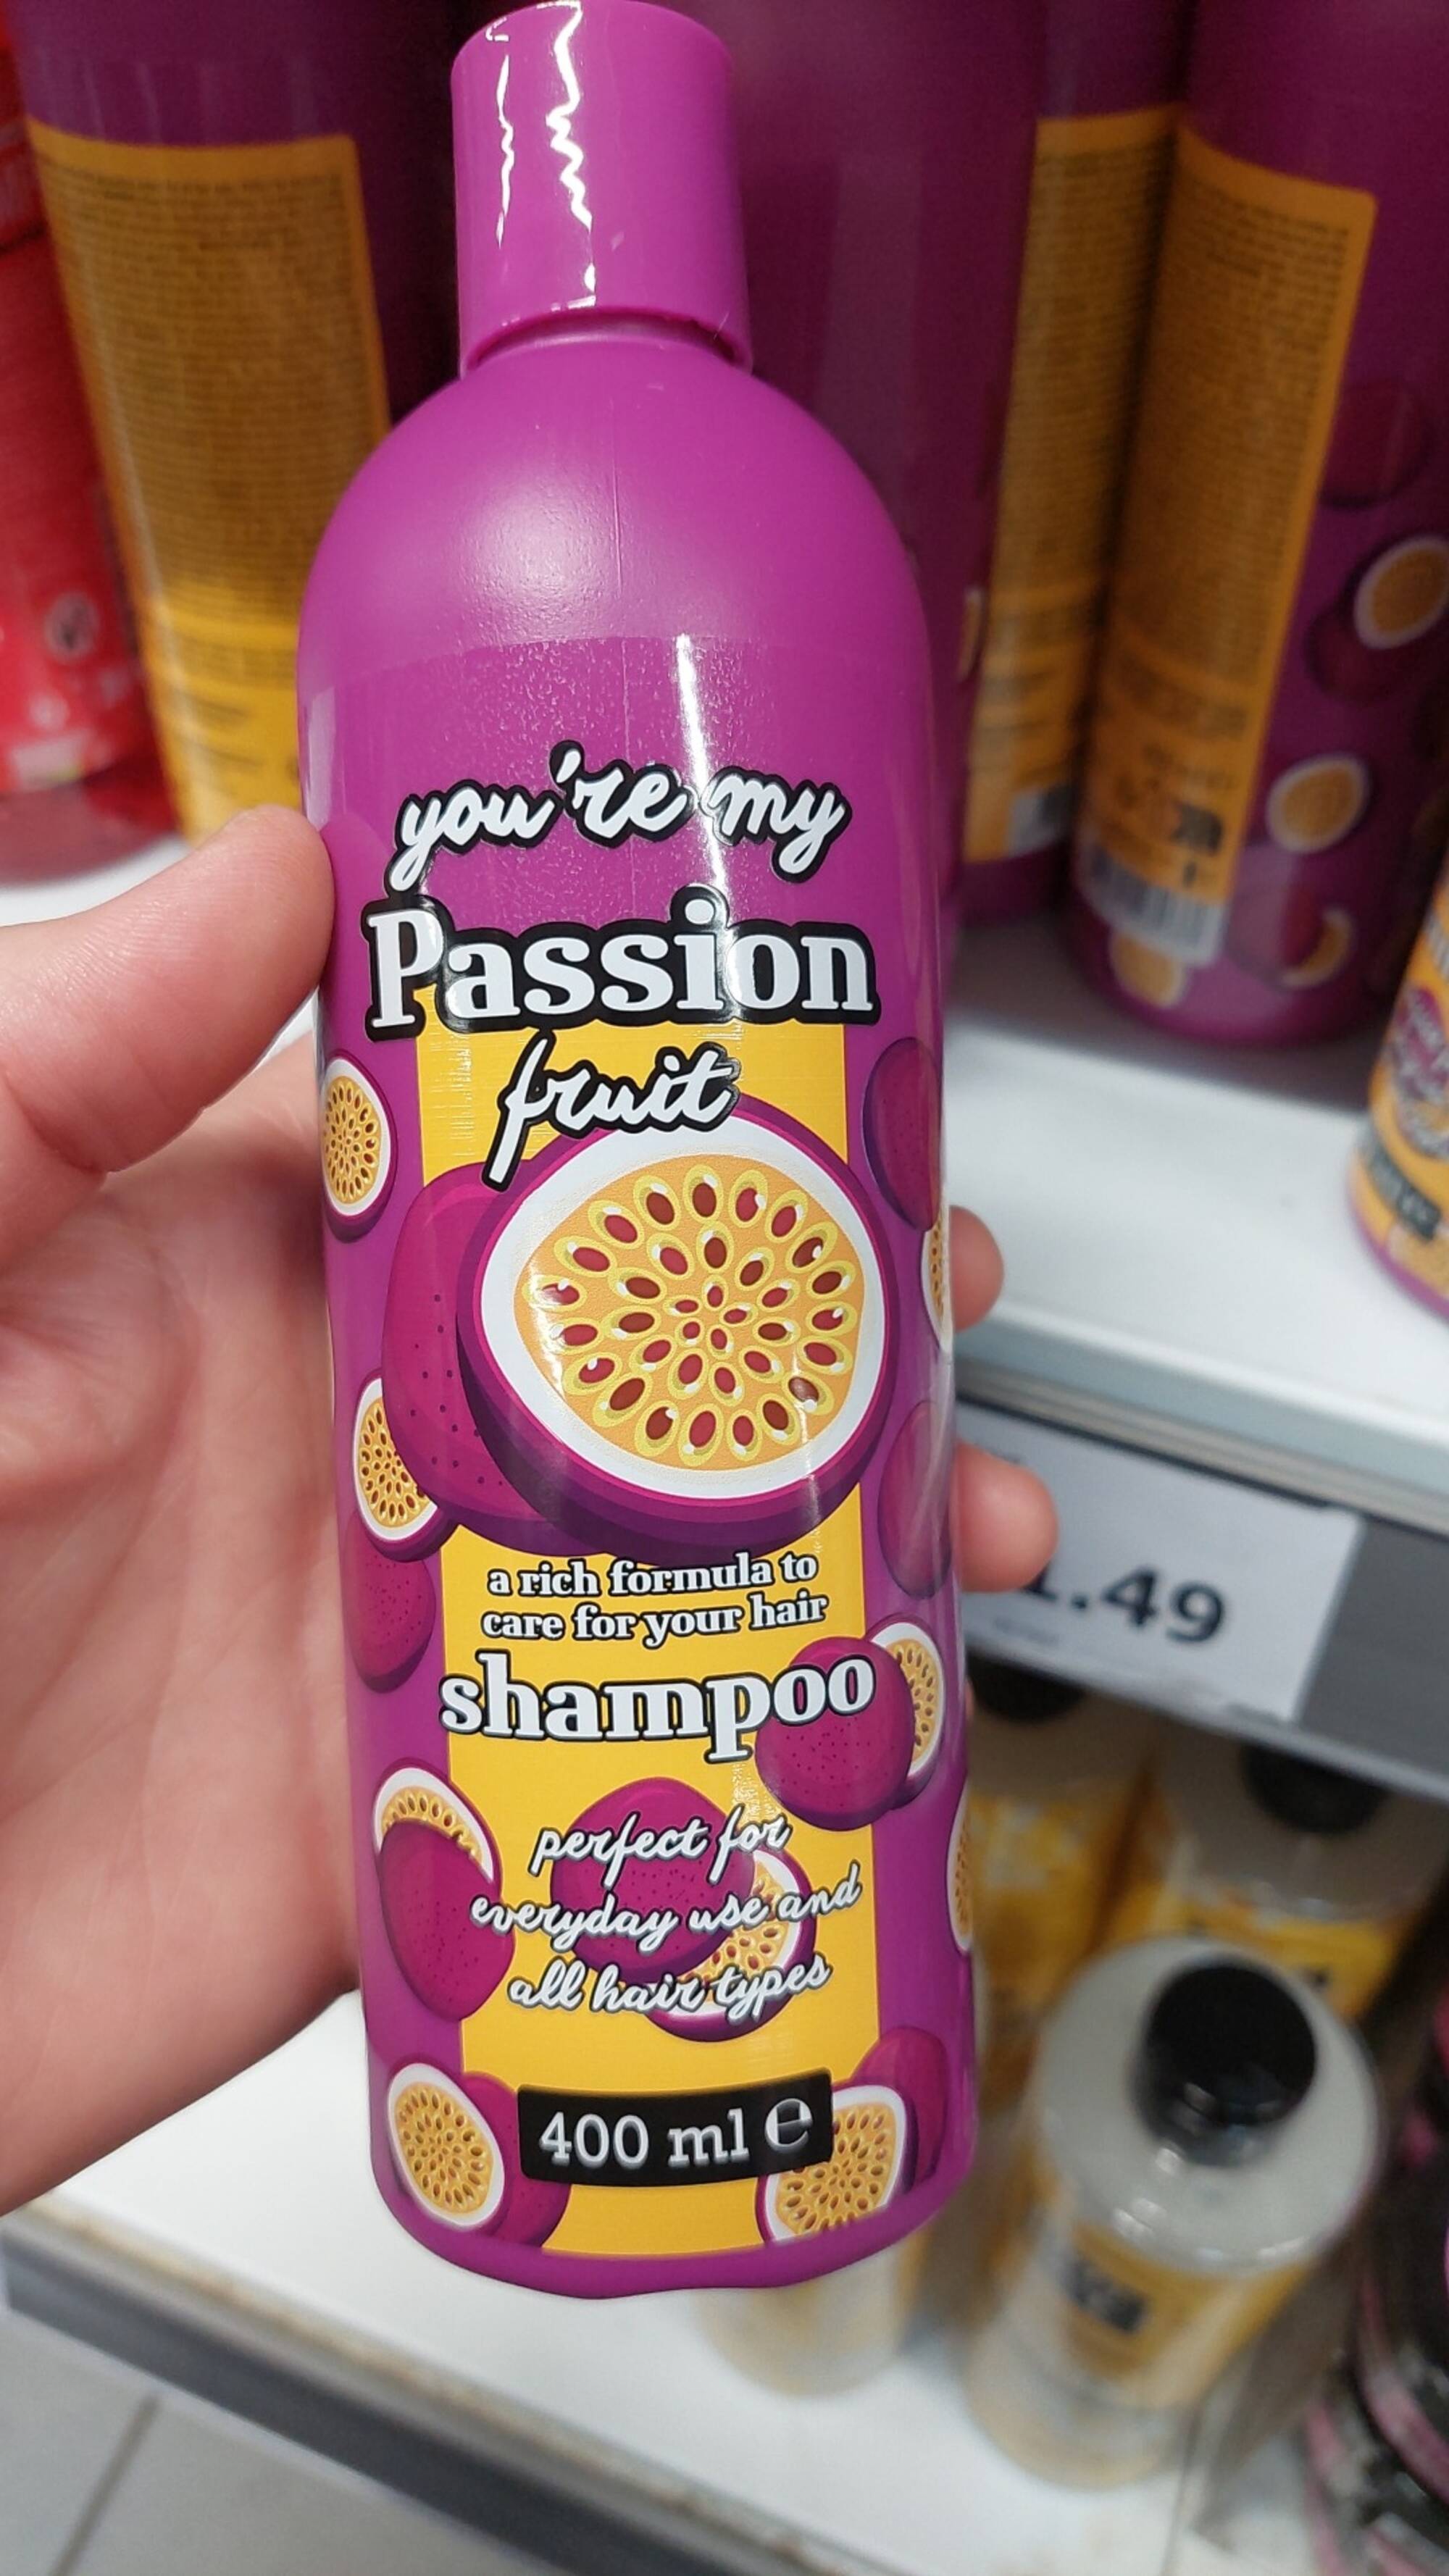 MAXBRANDS - You're my passion fruit - Shampoo